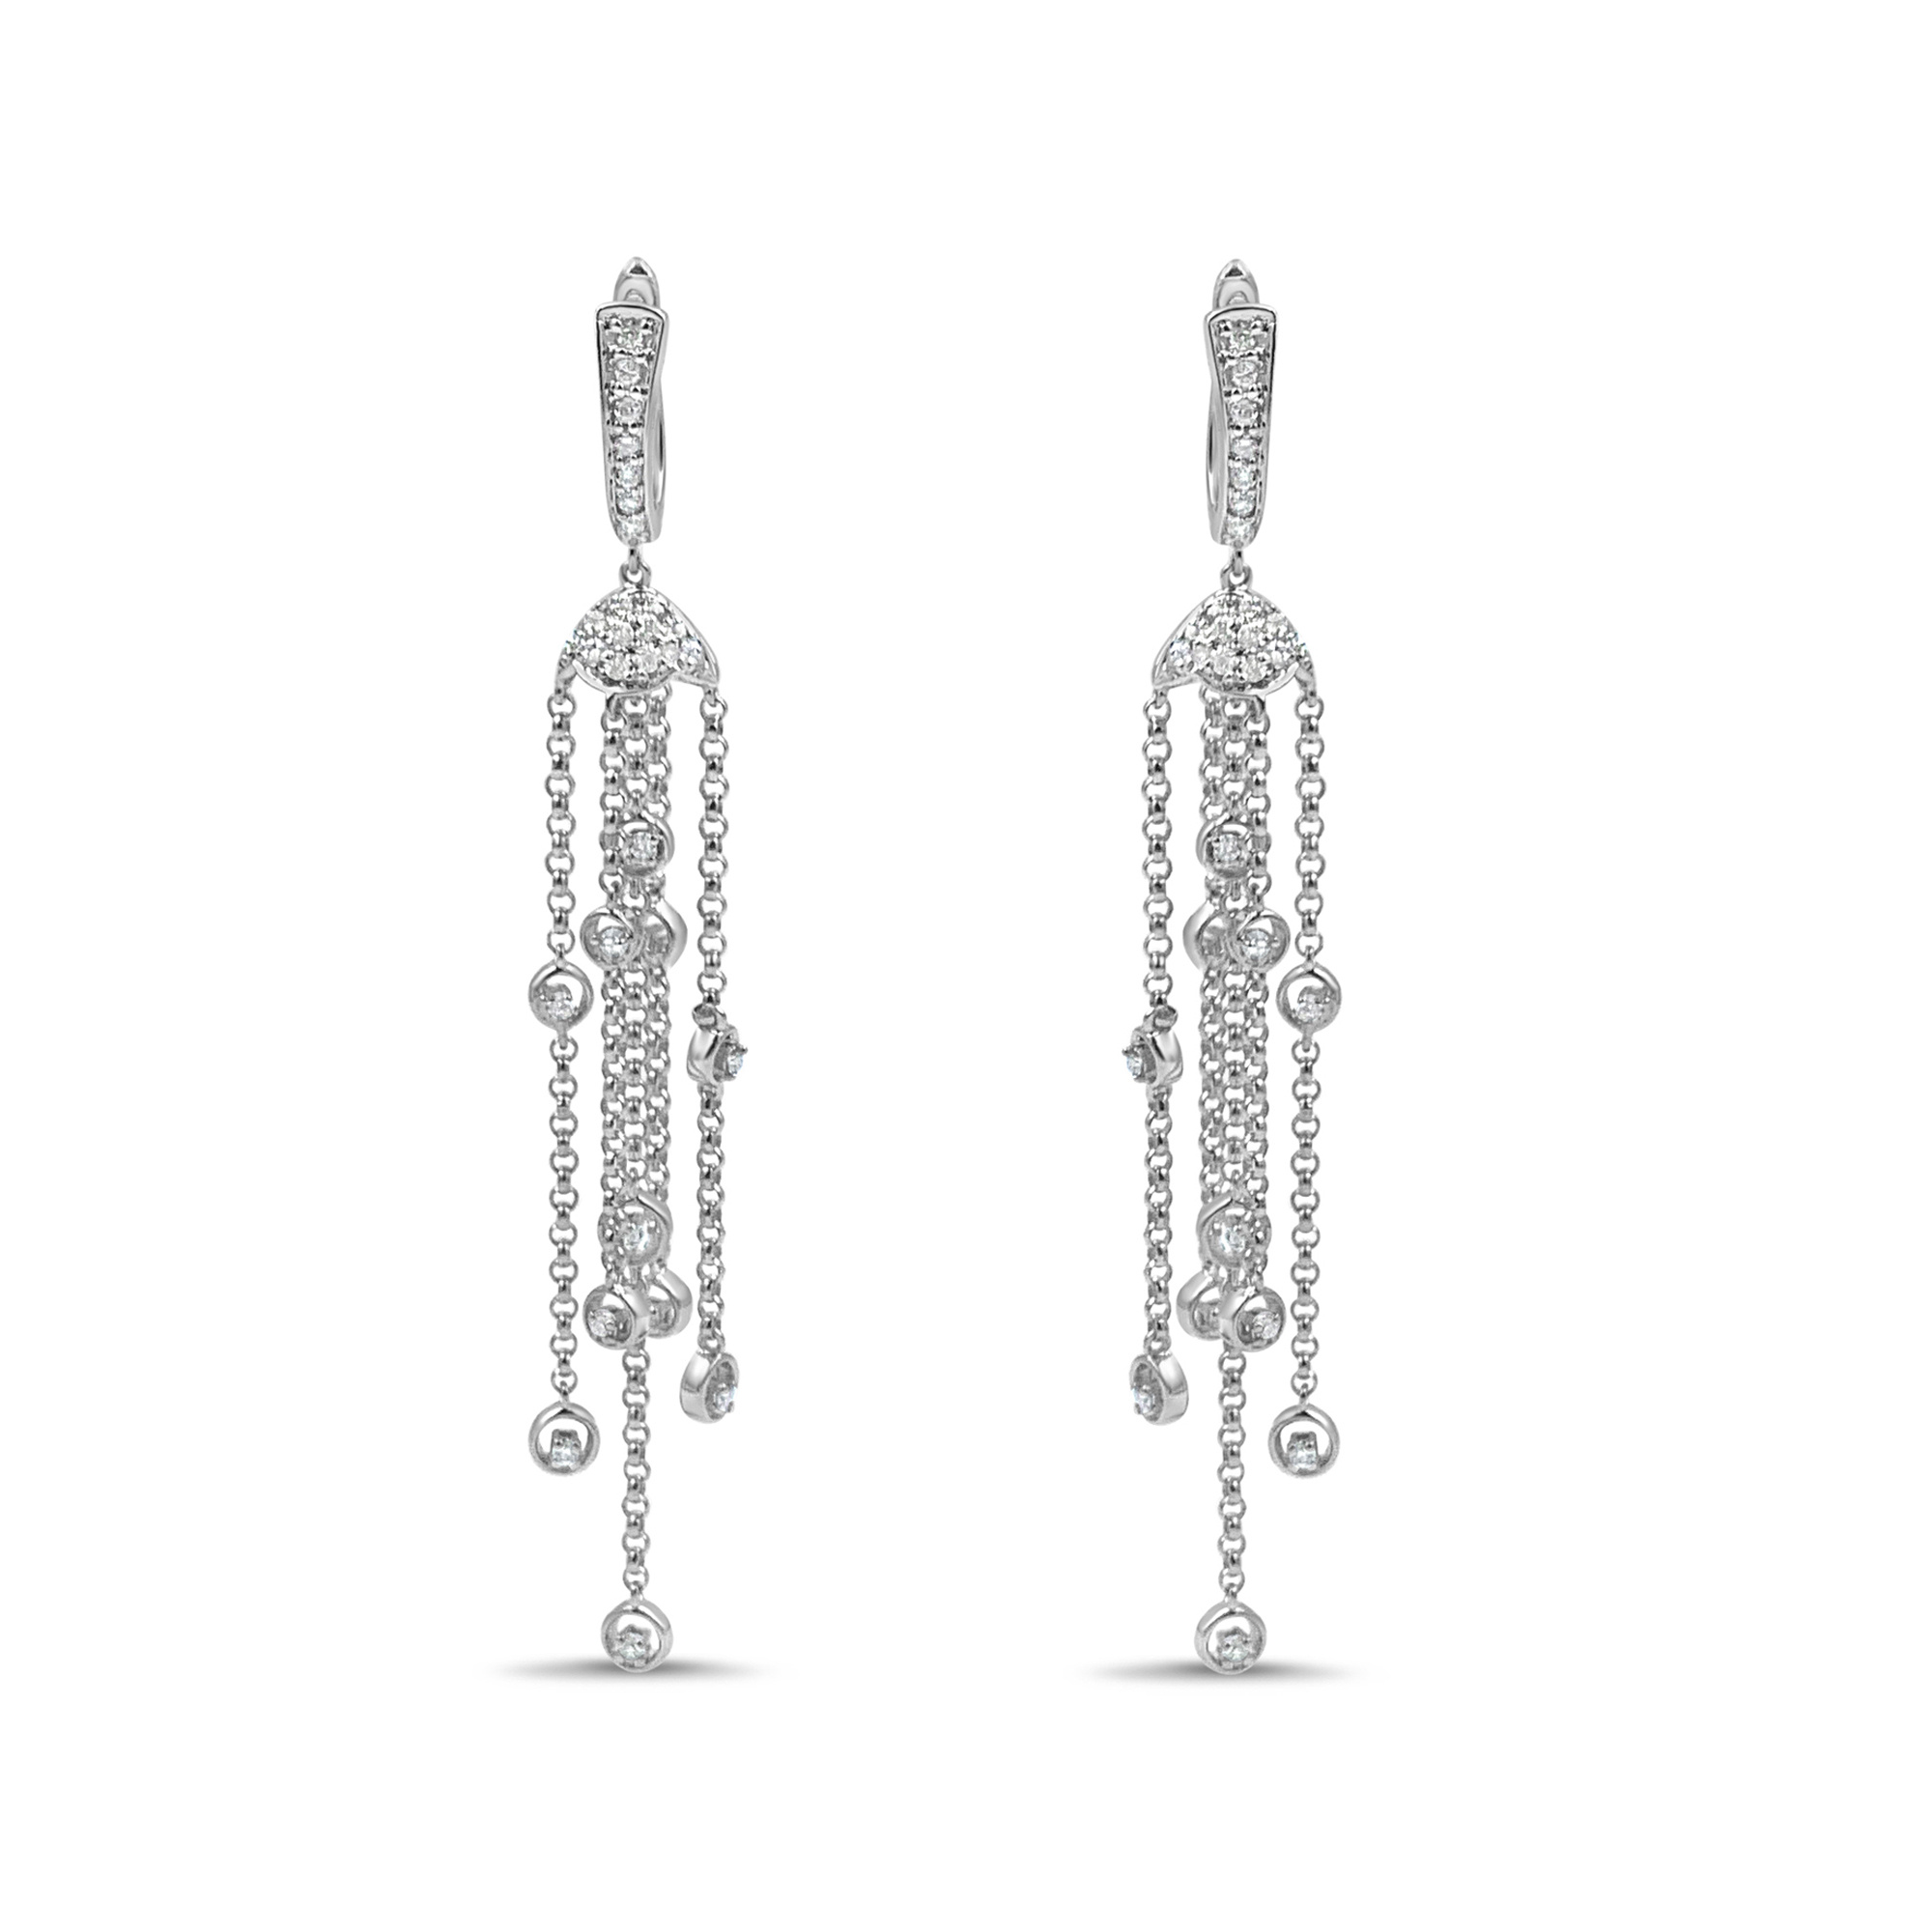 18k white gold earrings with 1,02ct diamonds